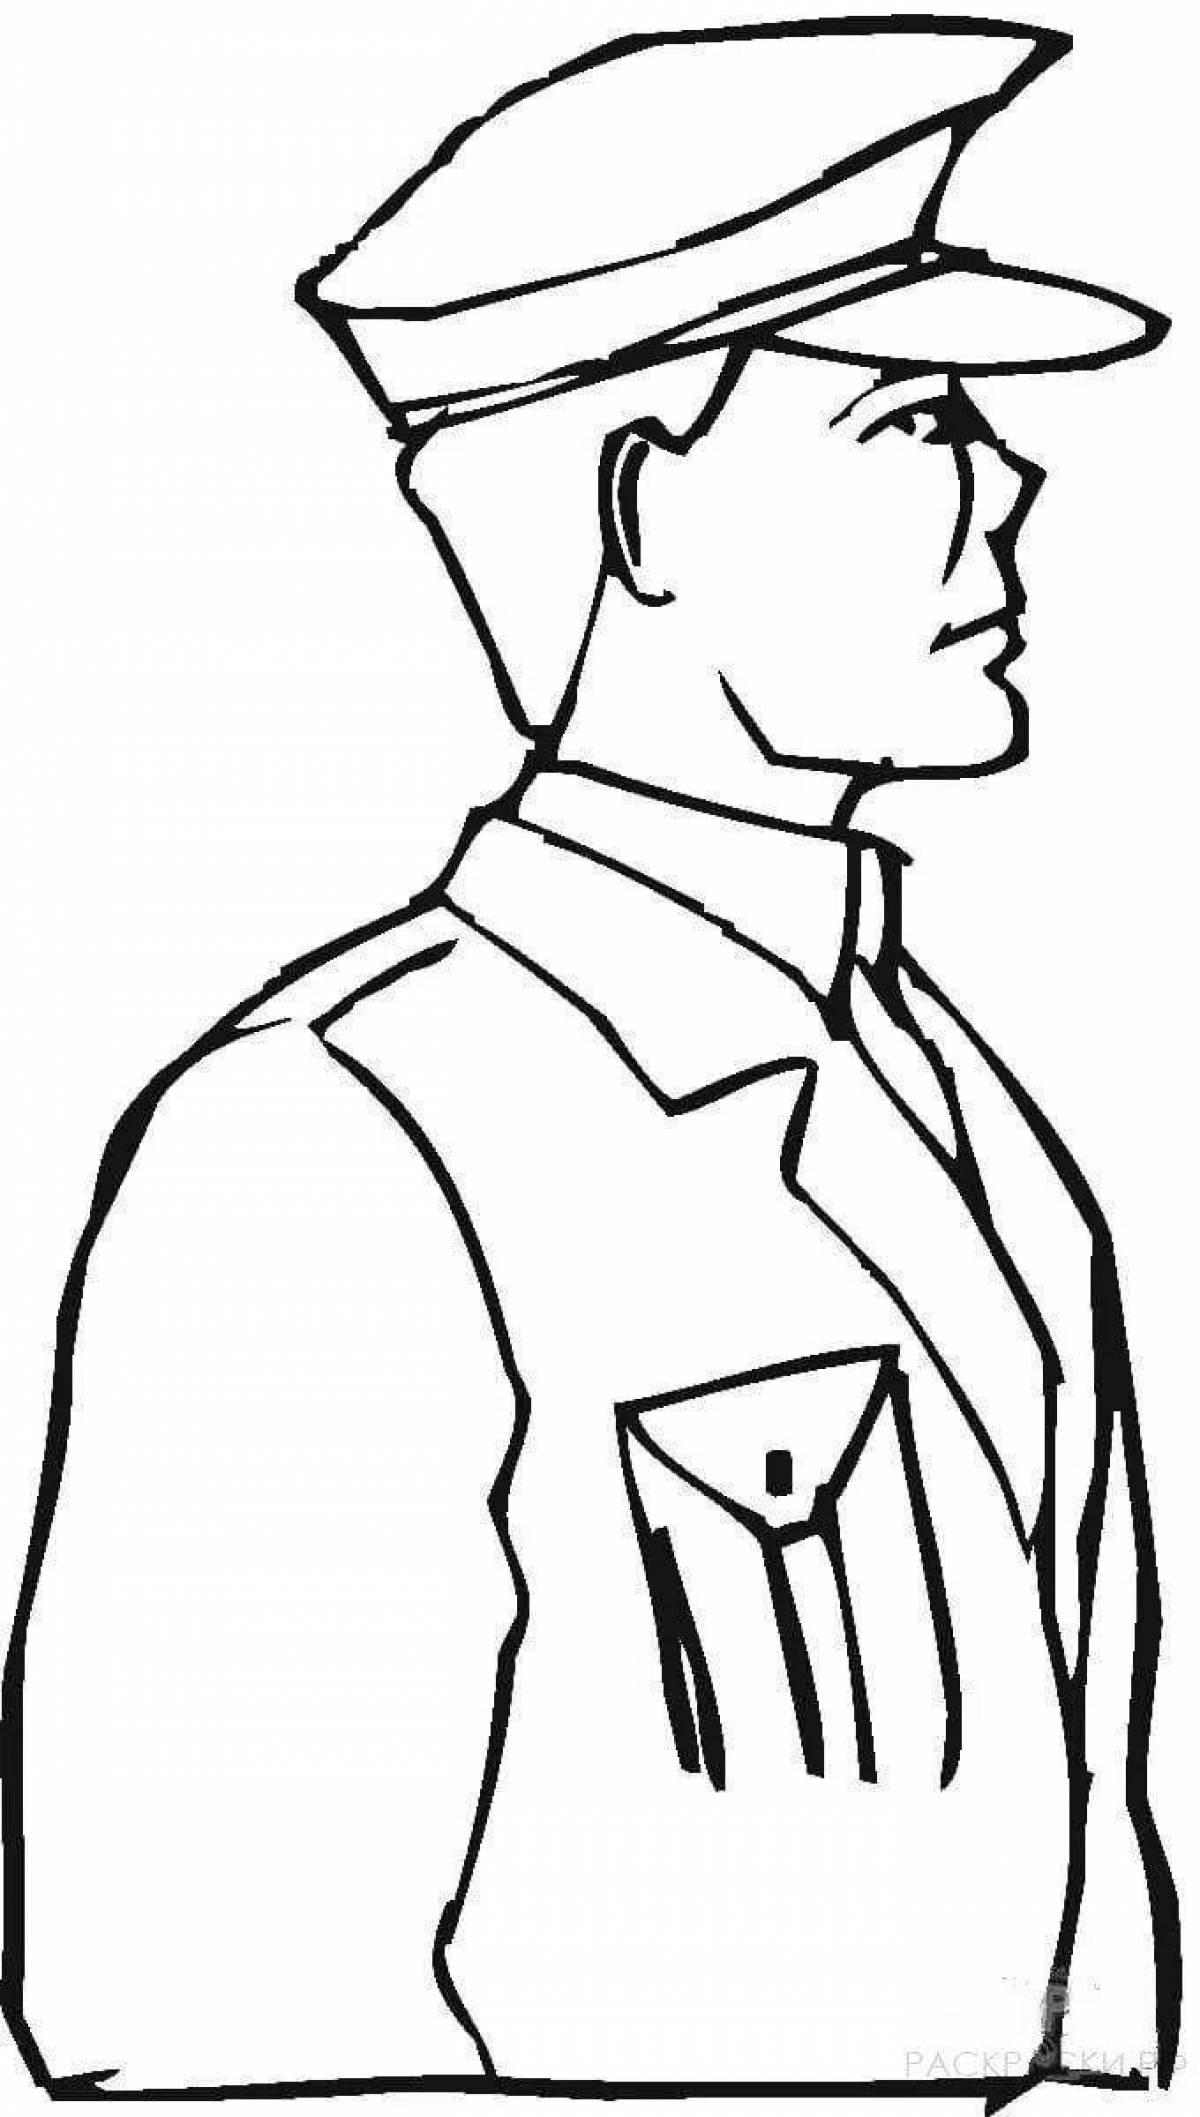 Awesome soldier face coloring page